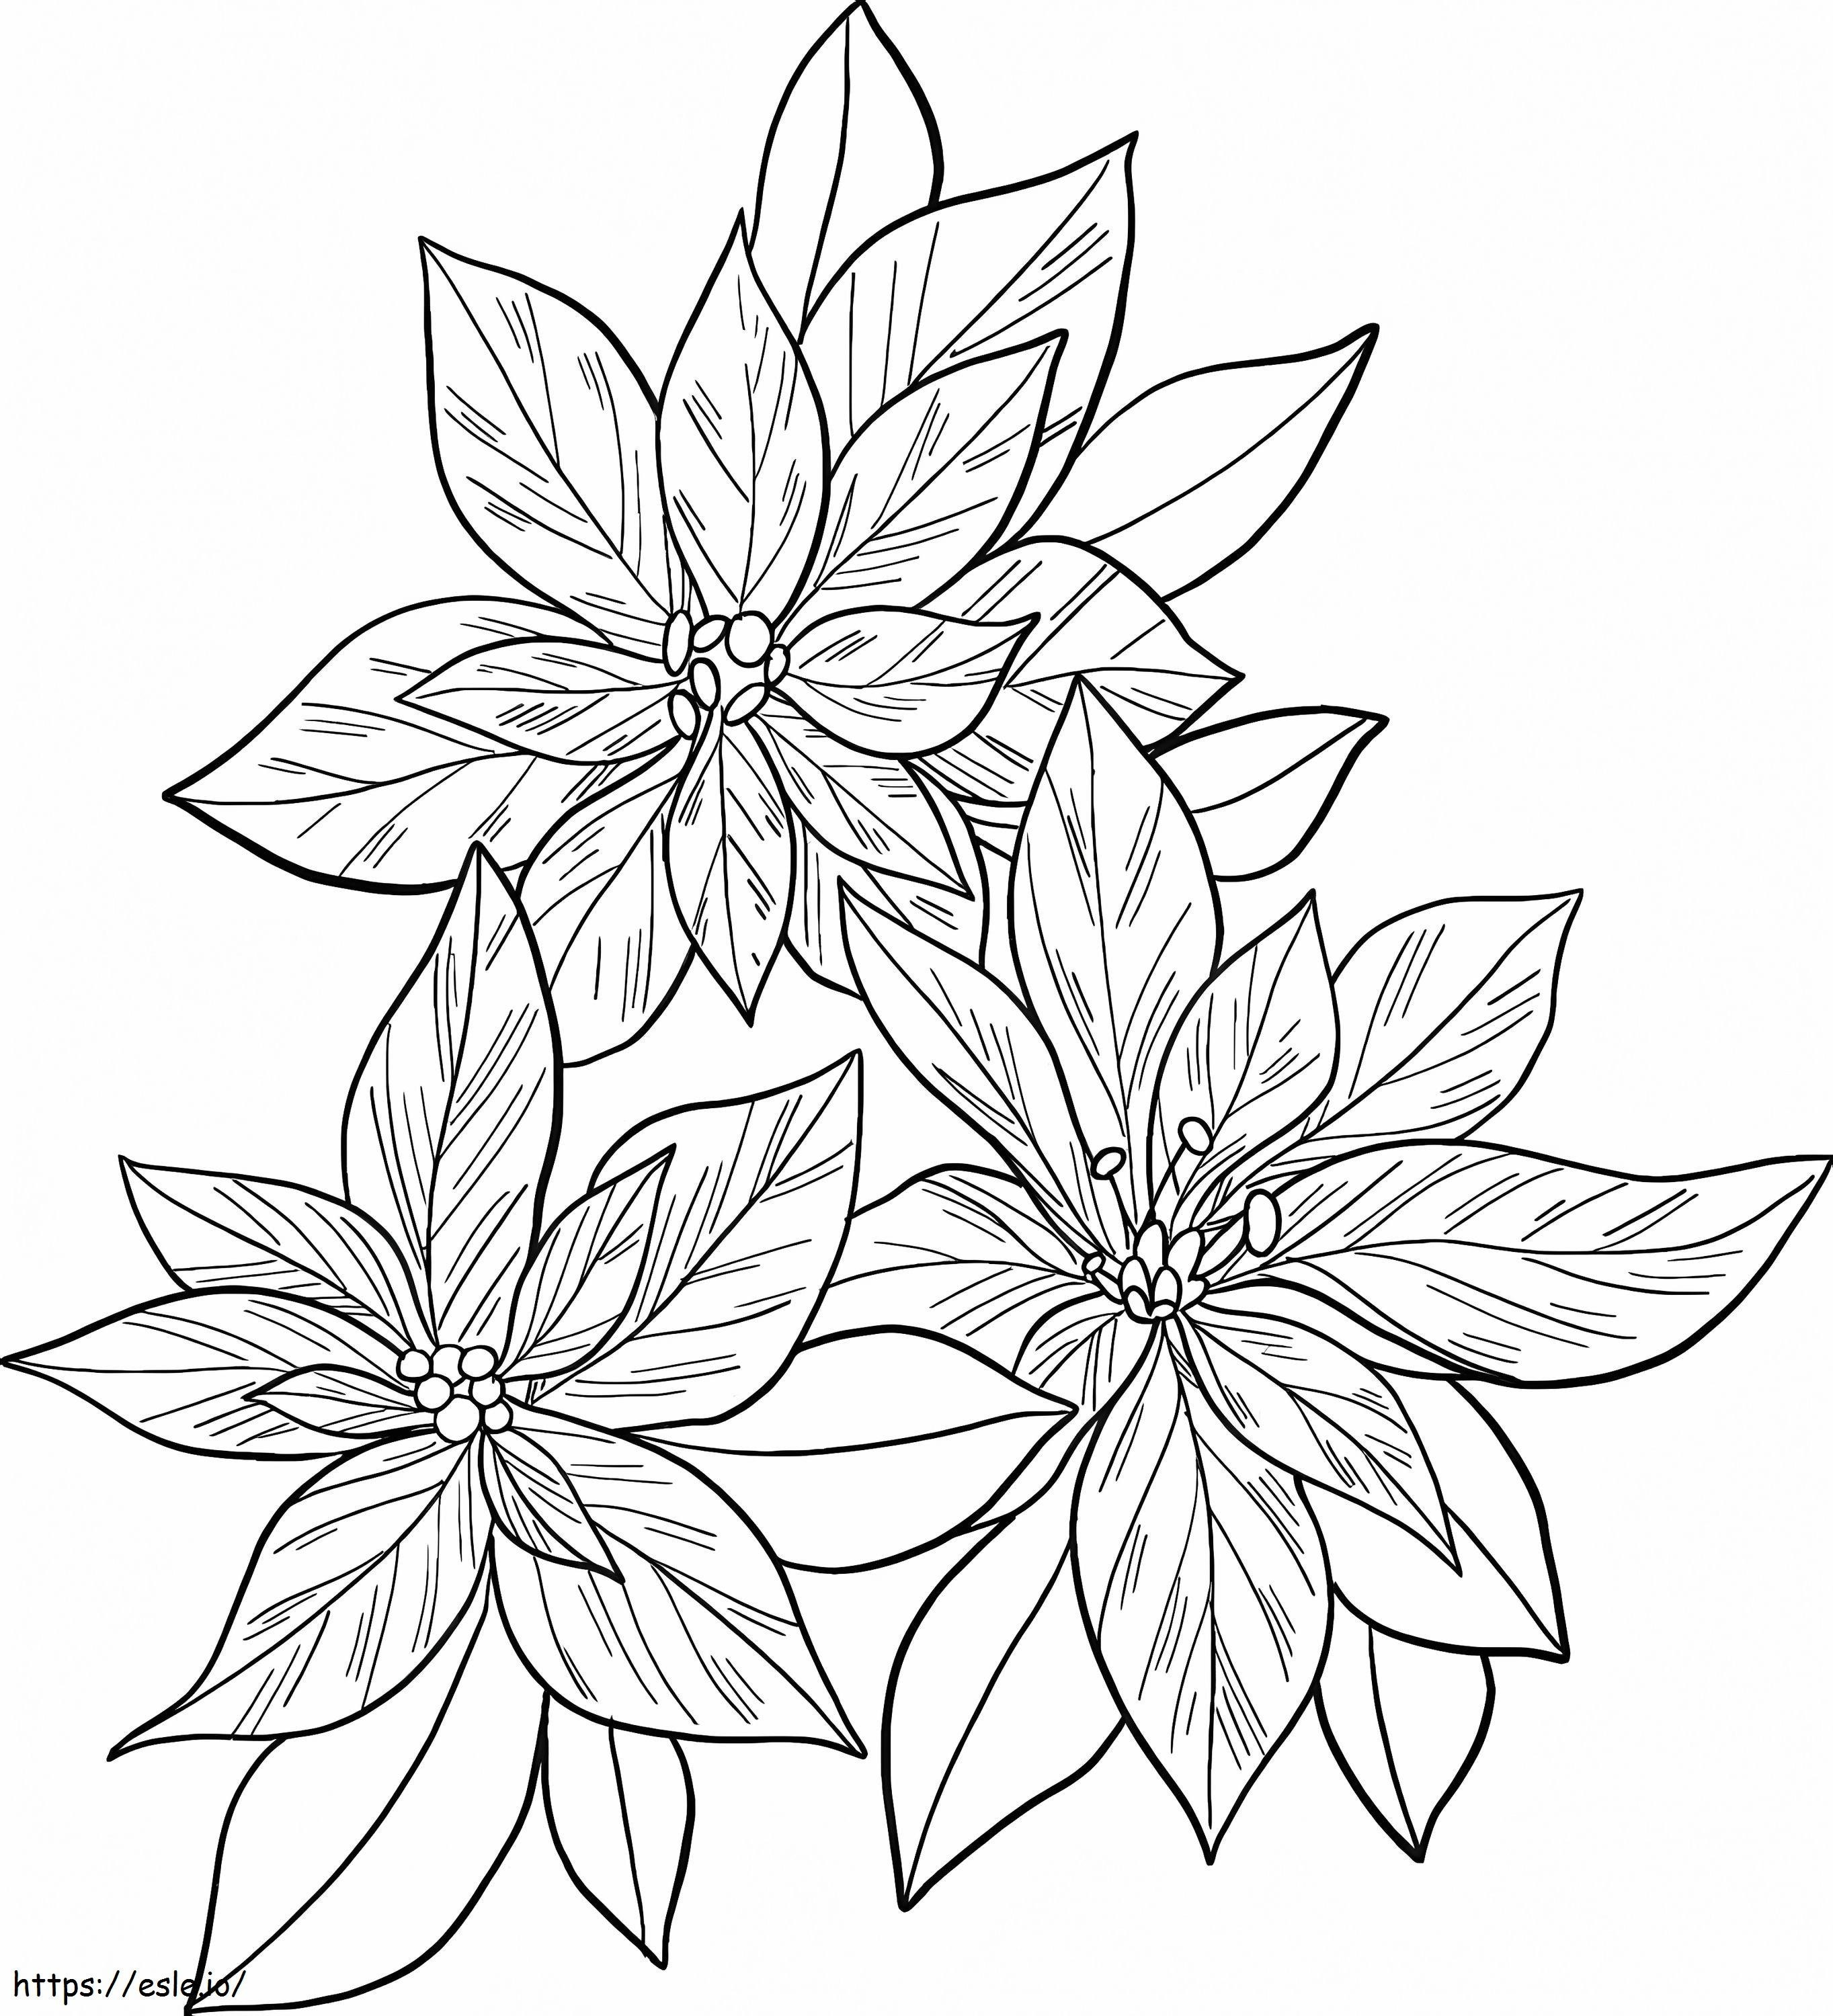 Poinsettia To Color coloring page